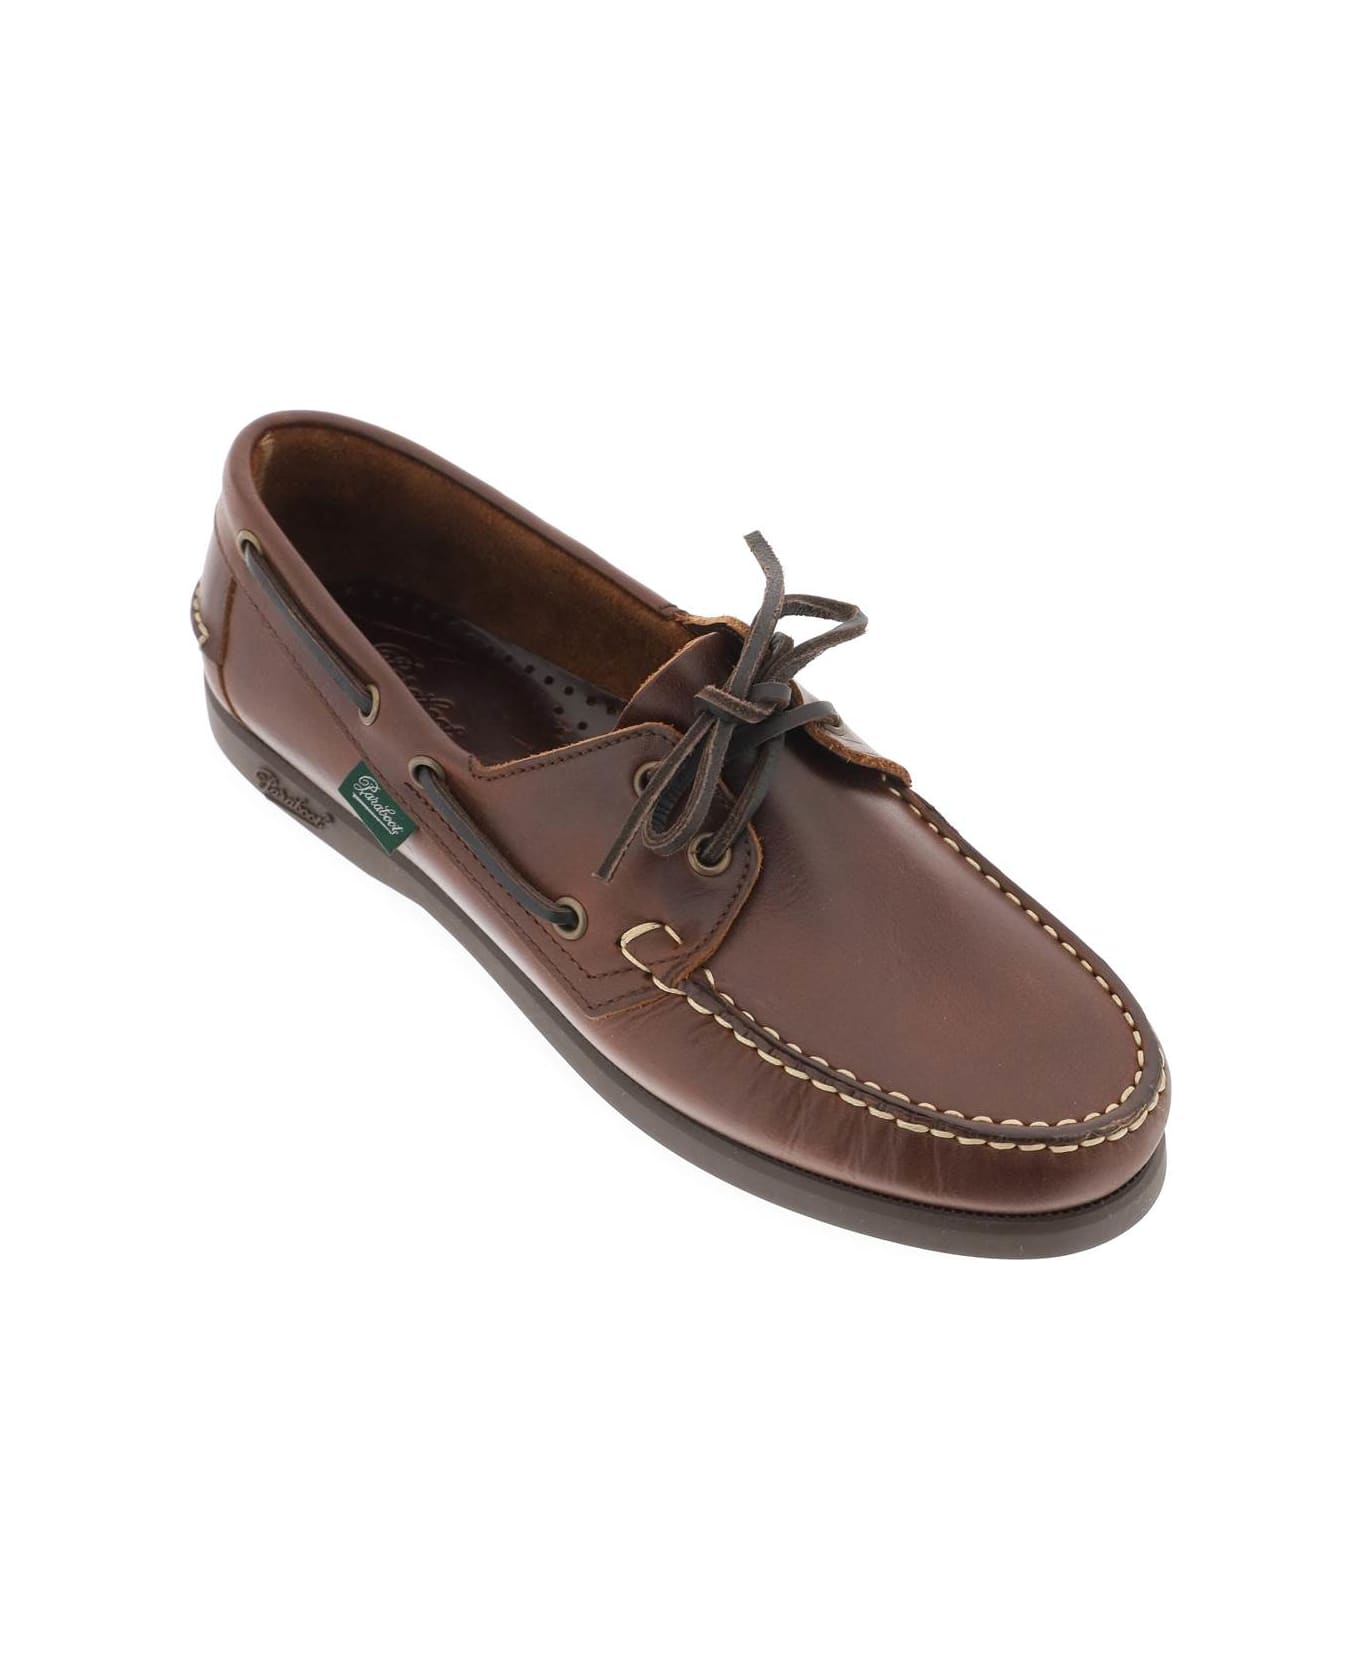 Paraboot Barth Loafers - MARRON LIS AMERICA (Brown) フラットシューズ